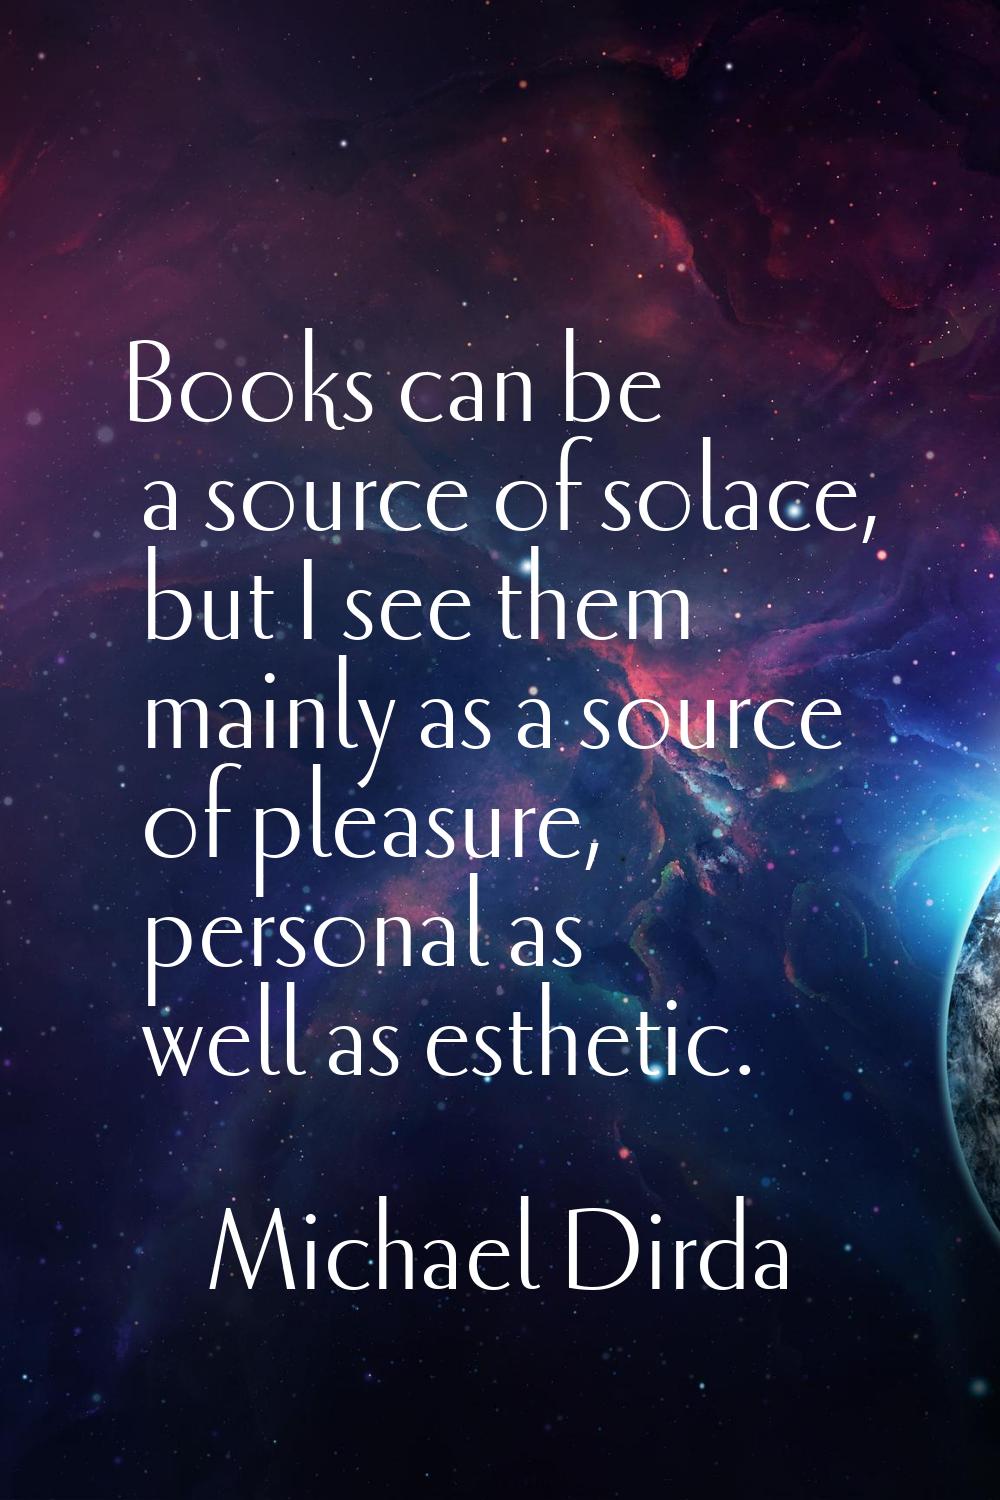 Books can be a source of solace, but I see them mainly as a source of pleasure, personal as well as